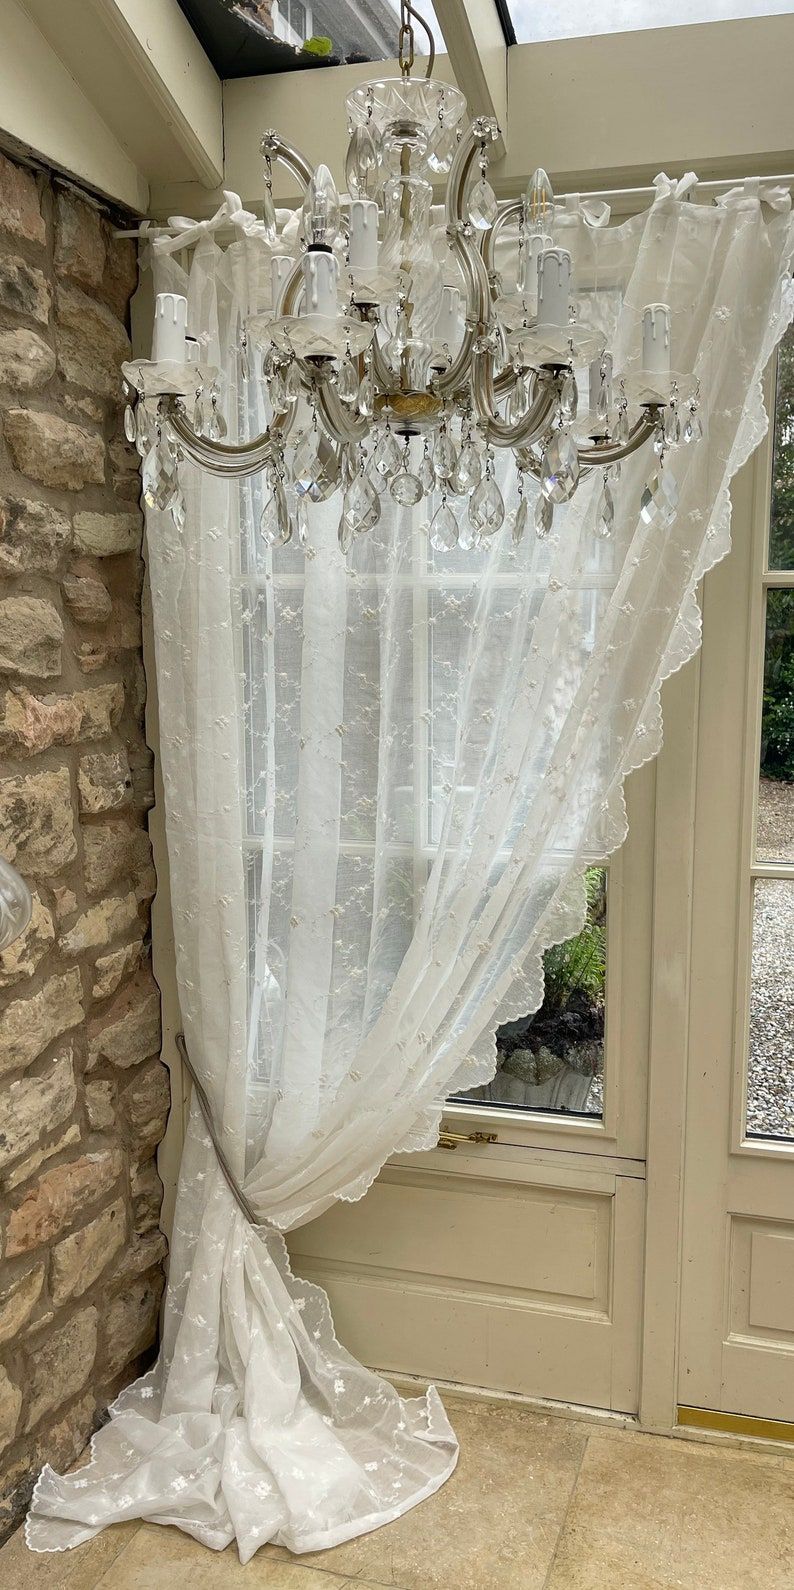 Choosing the Right Fabrics for Shabby
Chic Curtains